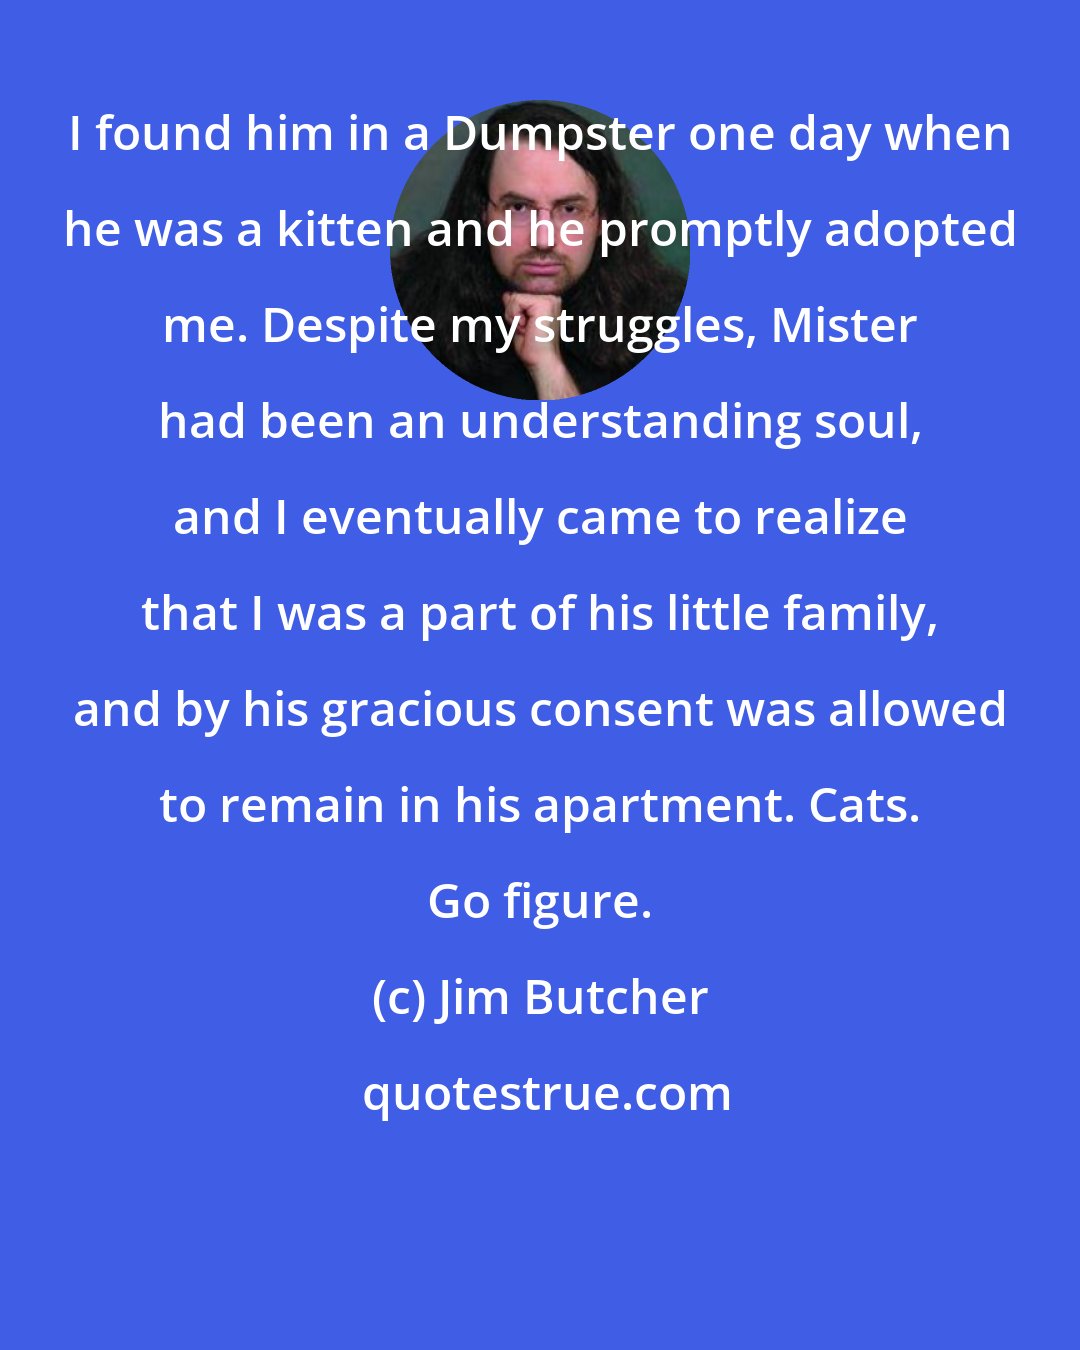 Jim Butcher: I found him in a Dumpster one day when he was a kitten and he promptly adopted me. Despite my struggles, Mister had been an understanding soul, and I eventually came to realize that I was a part of his little family, and by his gracious consent was allowed to remain in his apartment. Cats. Go figure.